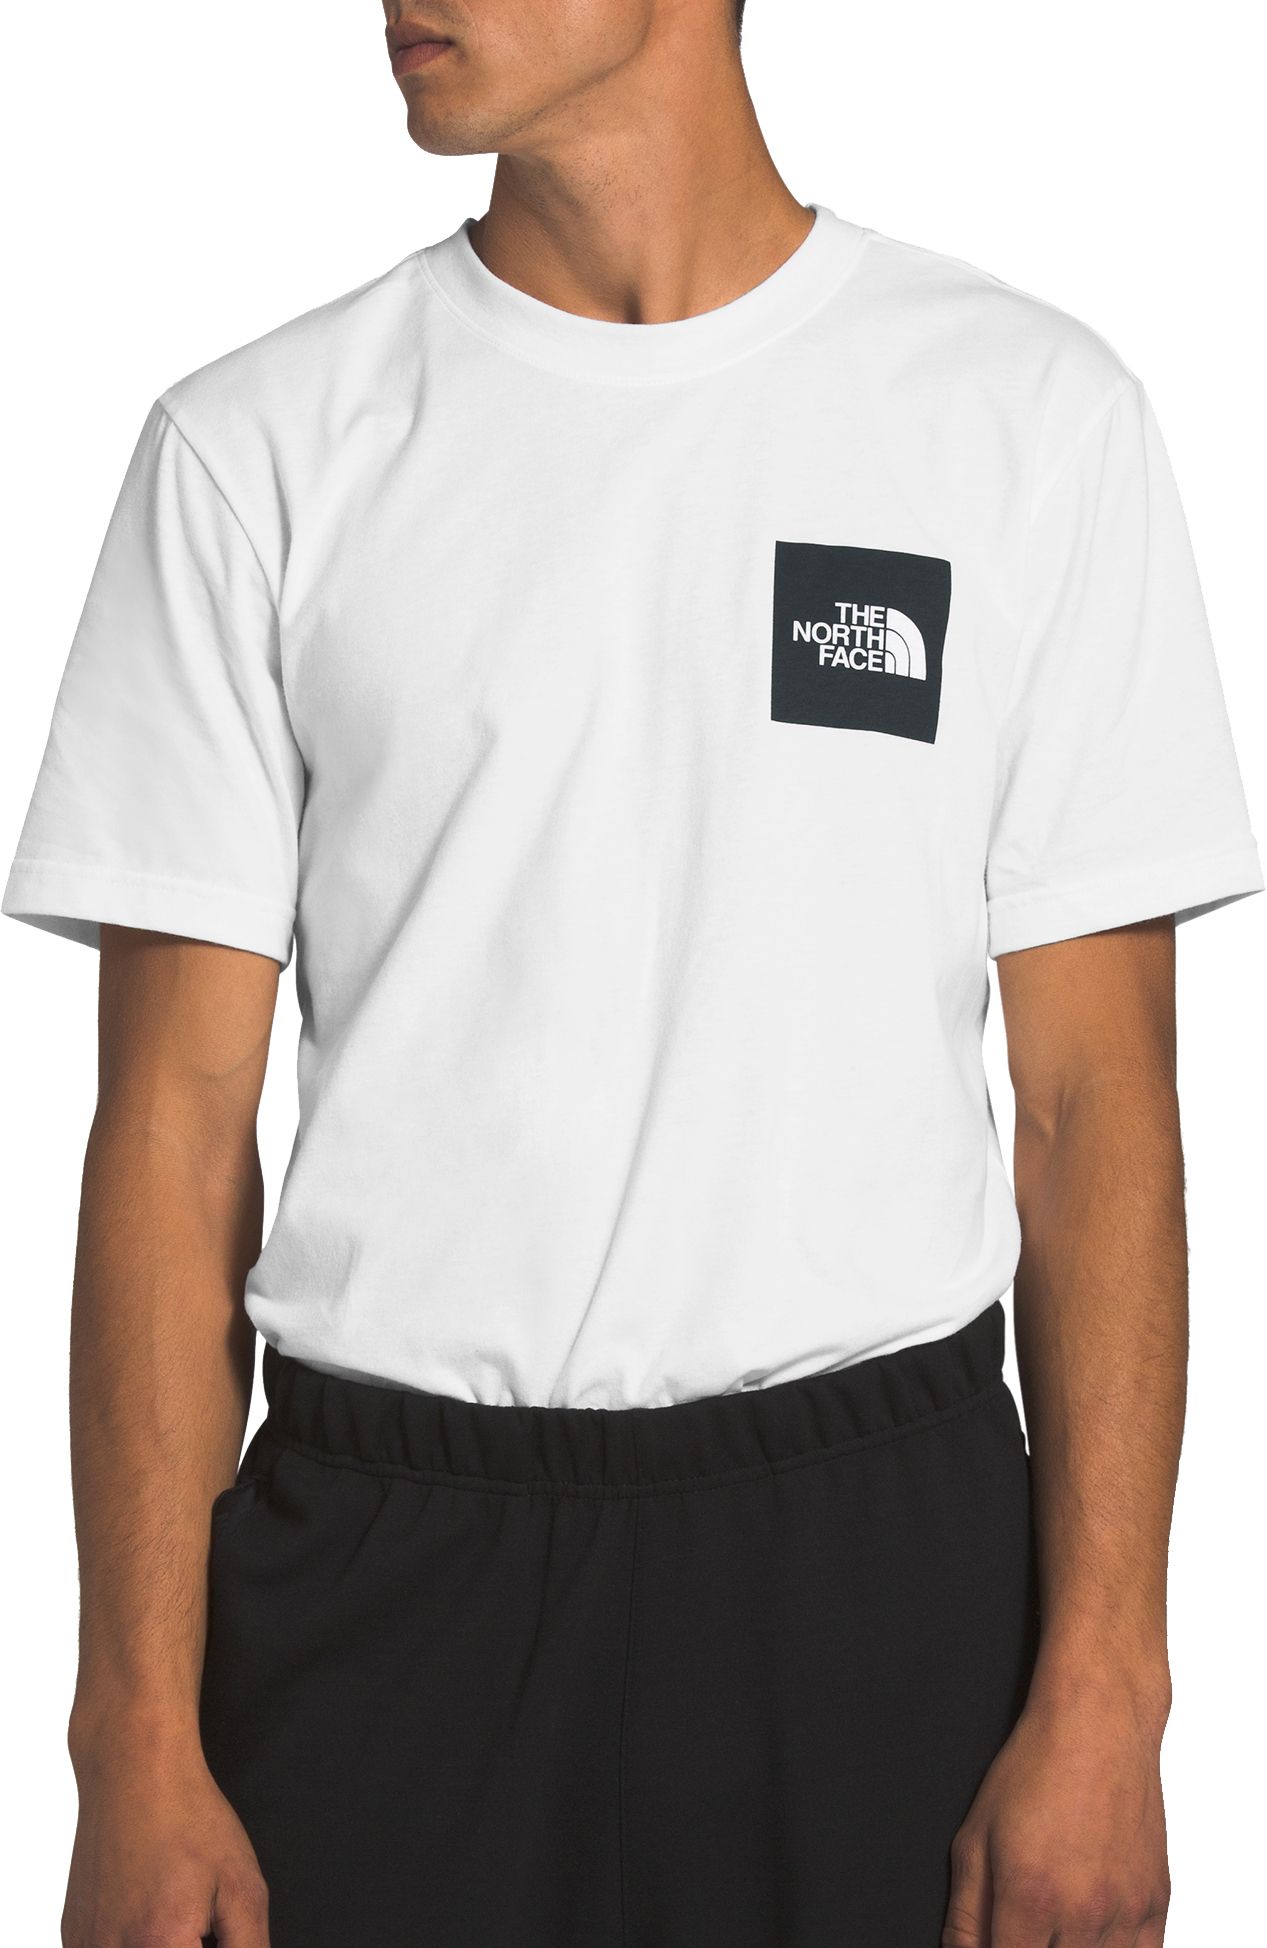 The North Face Men's New Box Cotton Short Sleeve T-Shirt - .00